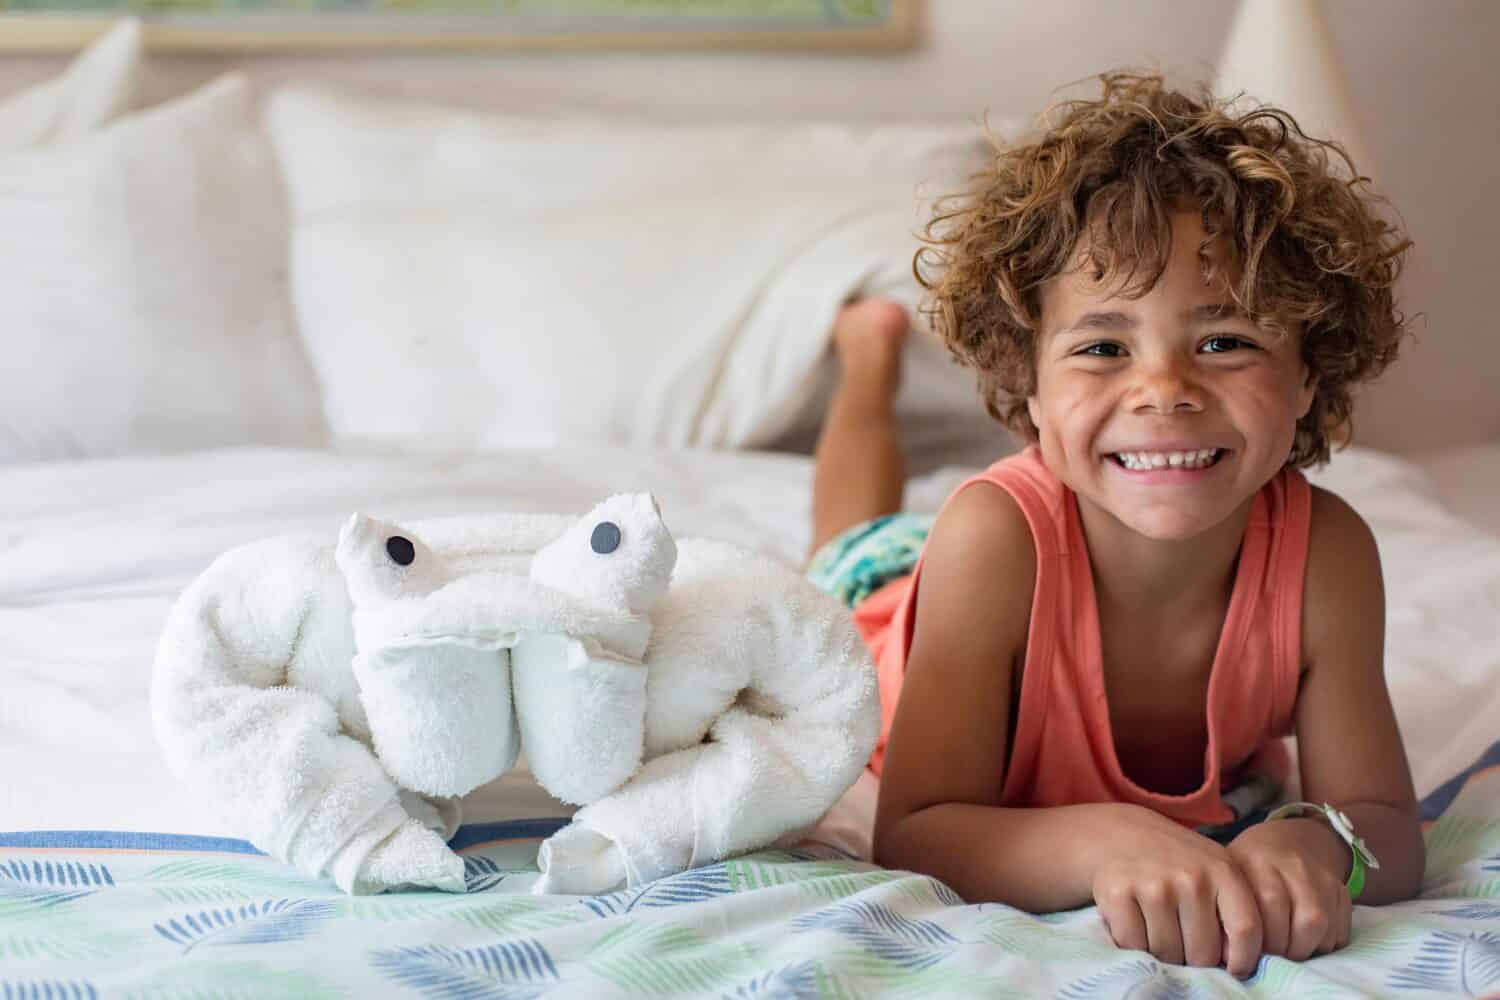 Beautiful young diverse boy sitting on bed in a cruise ship next to a towel animal. Enjoying a fun cruise vacation in his luxury cruise ship cabin with his family